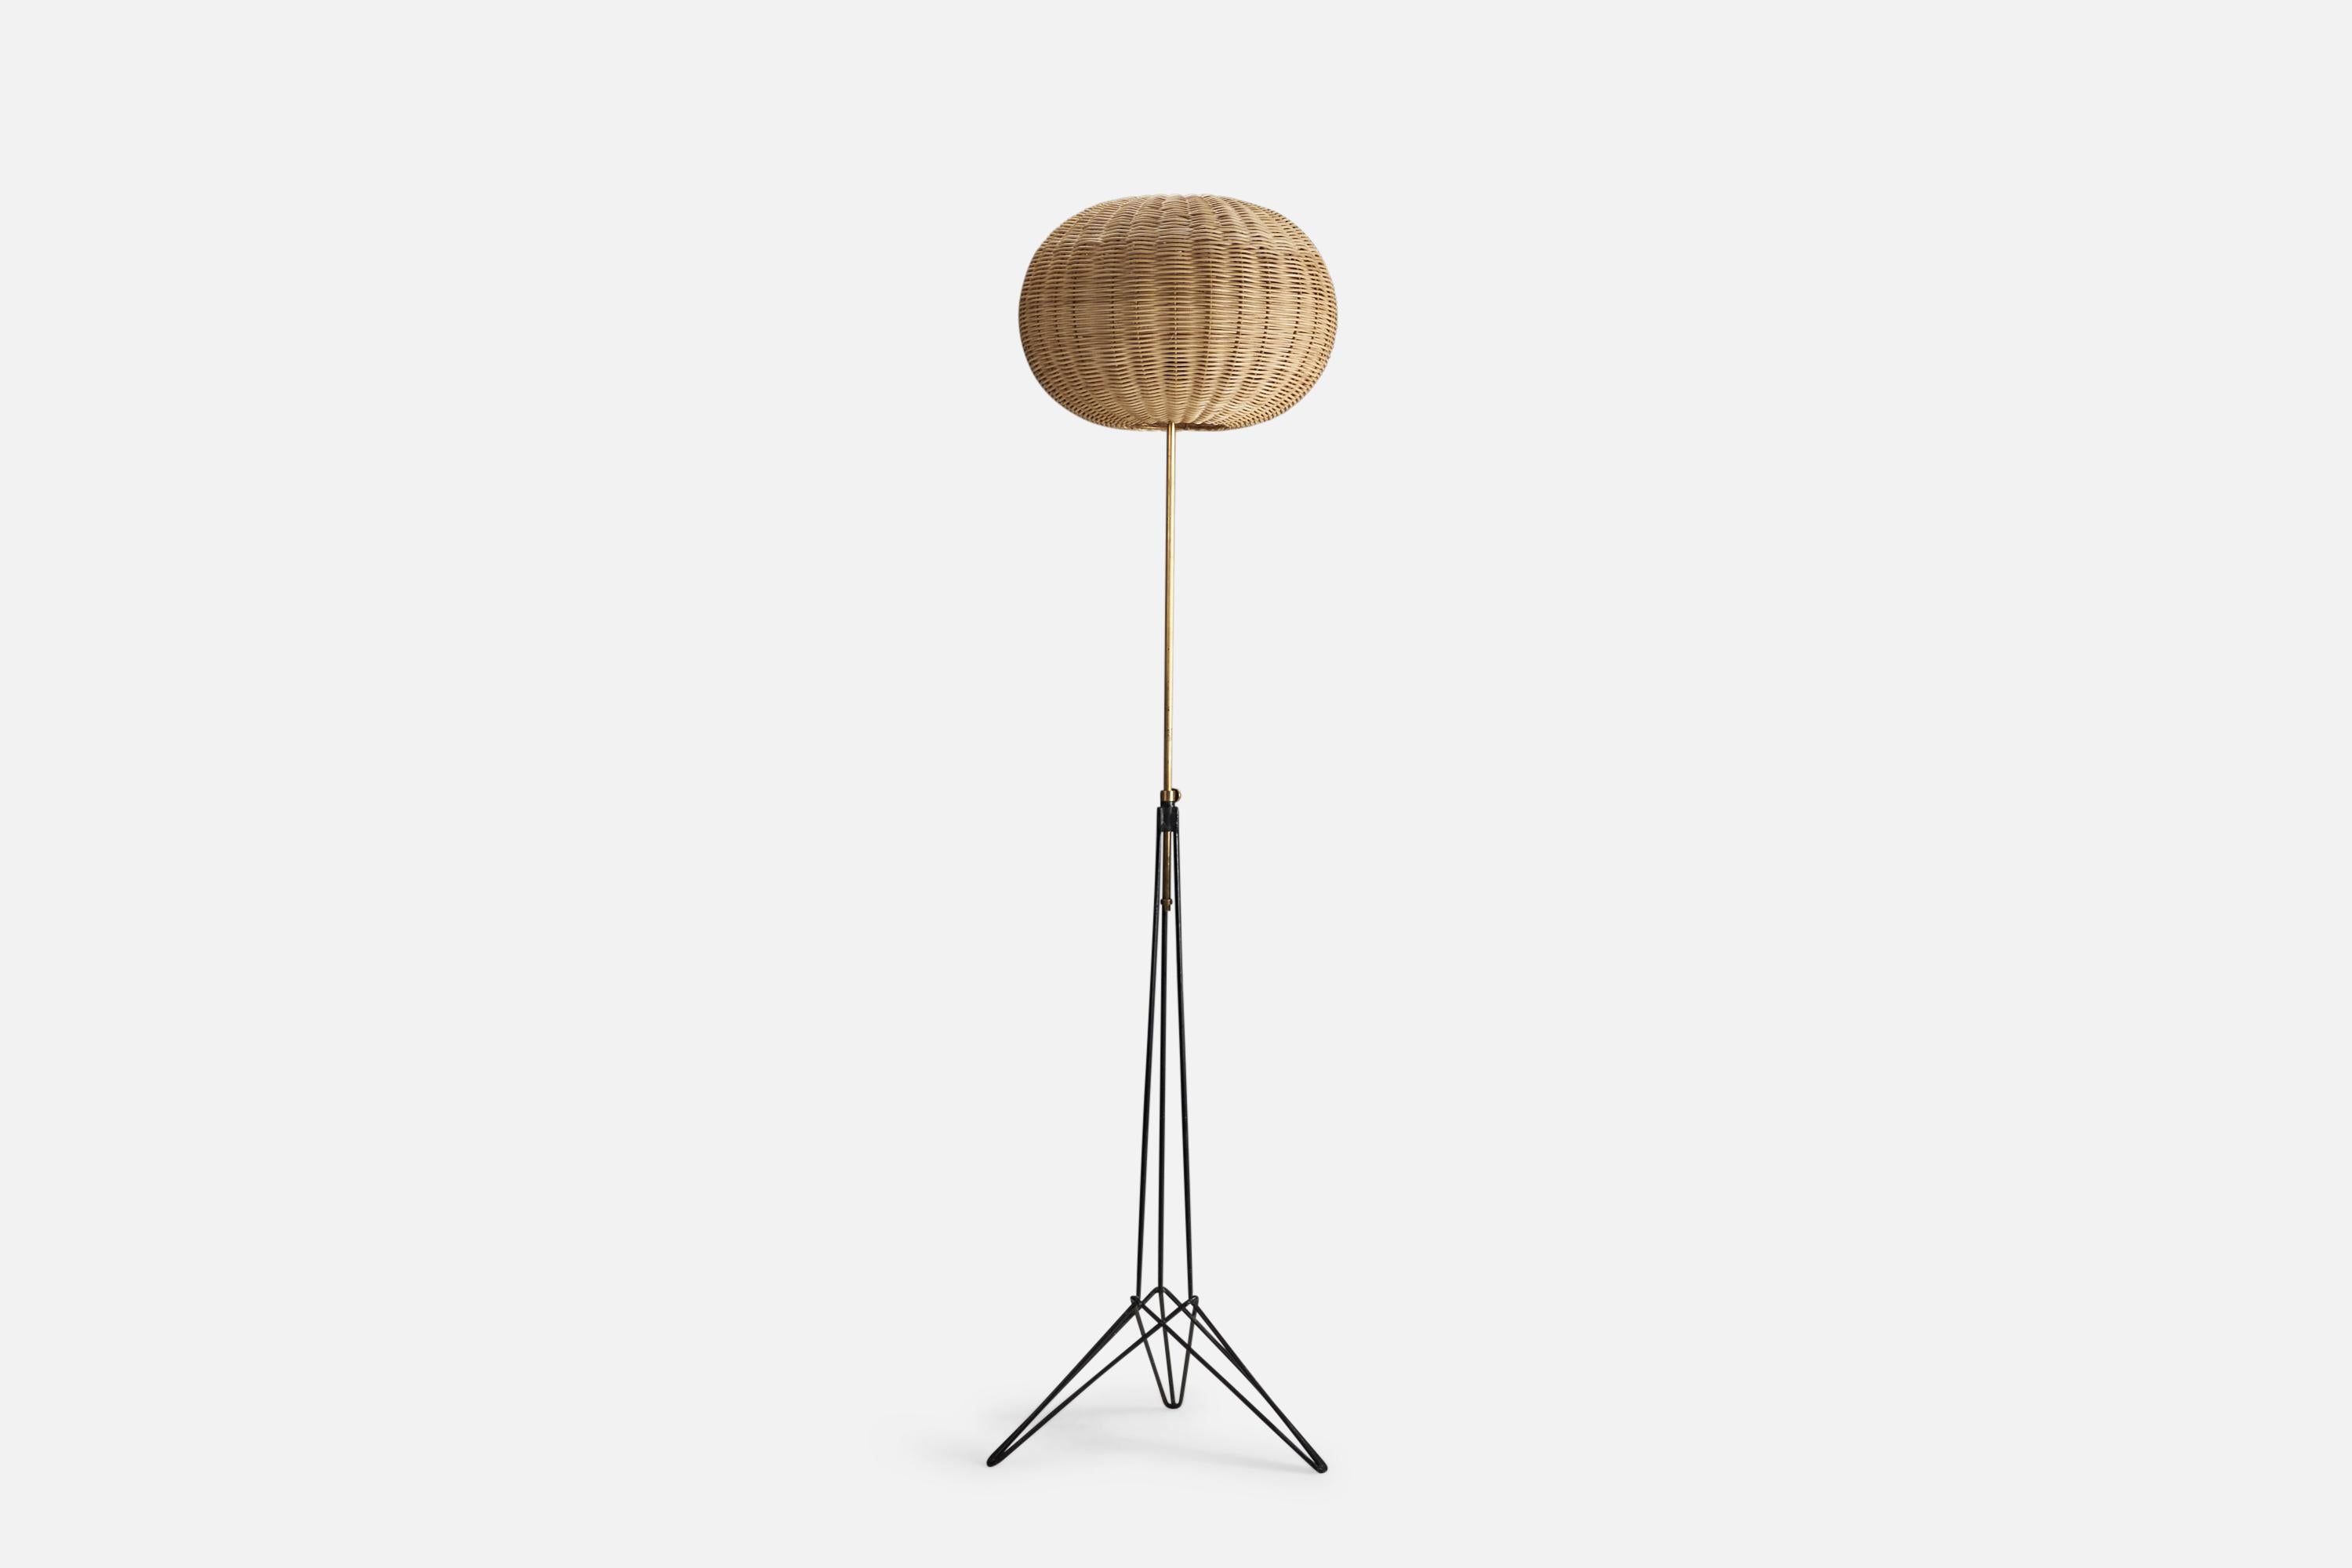 A brass, metal and rattan floor lamp designed and produce by an Italian Designer, Italy, 1960s.

Socket takes standard E-26 medium base bulb.

There is no maximum wattage stated on the fixture.